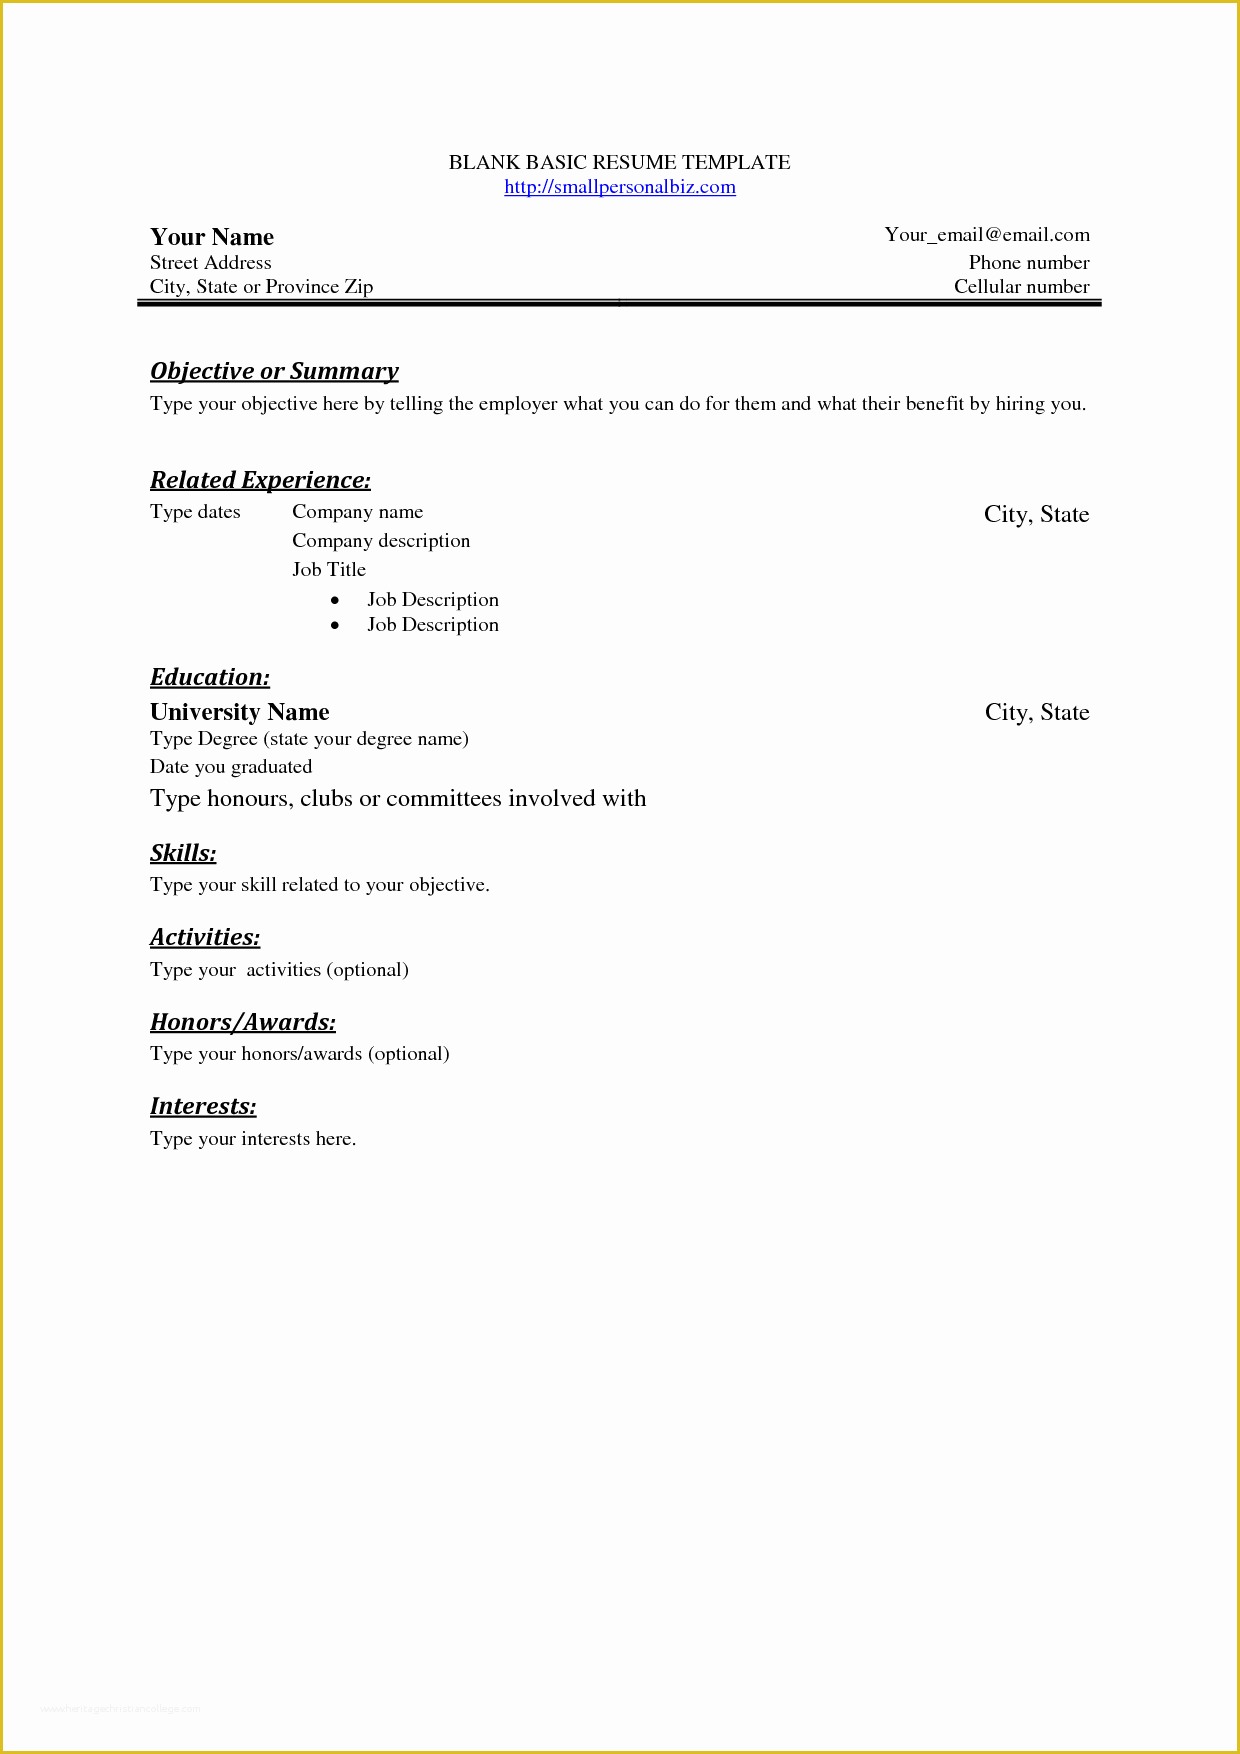 Easy Resume Template Free Of Free Basic Blank Resume Template